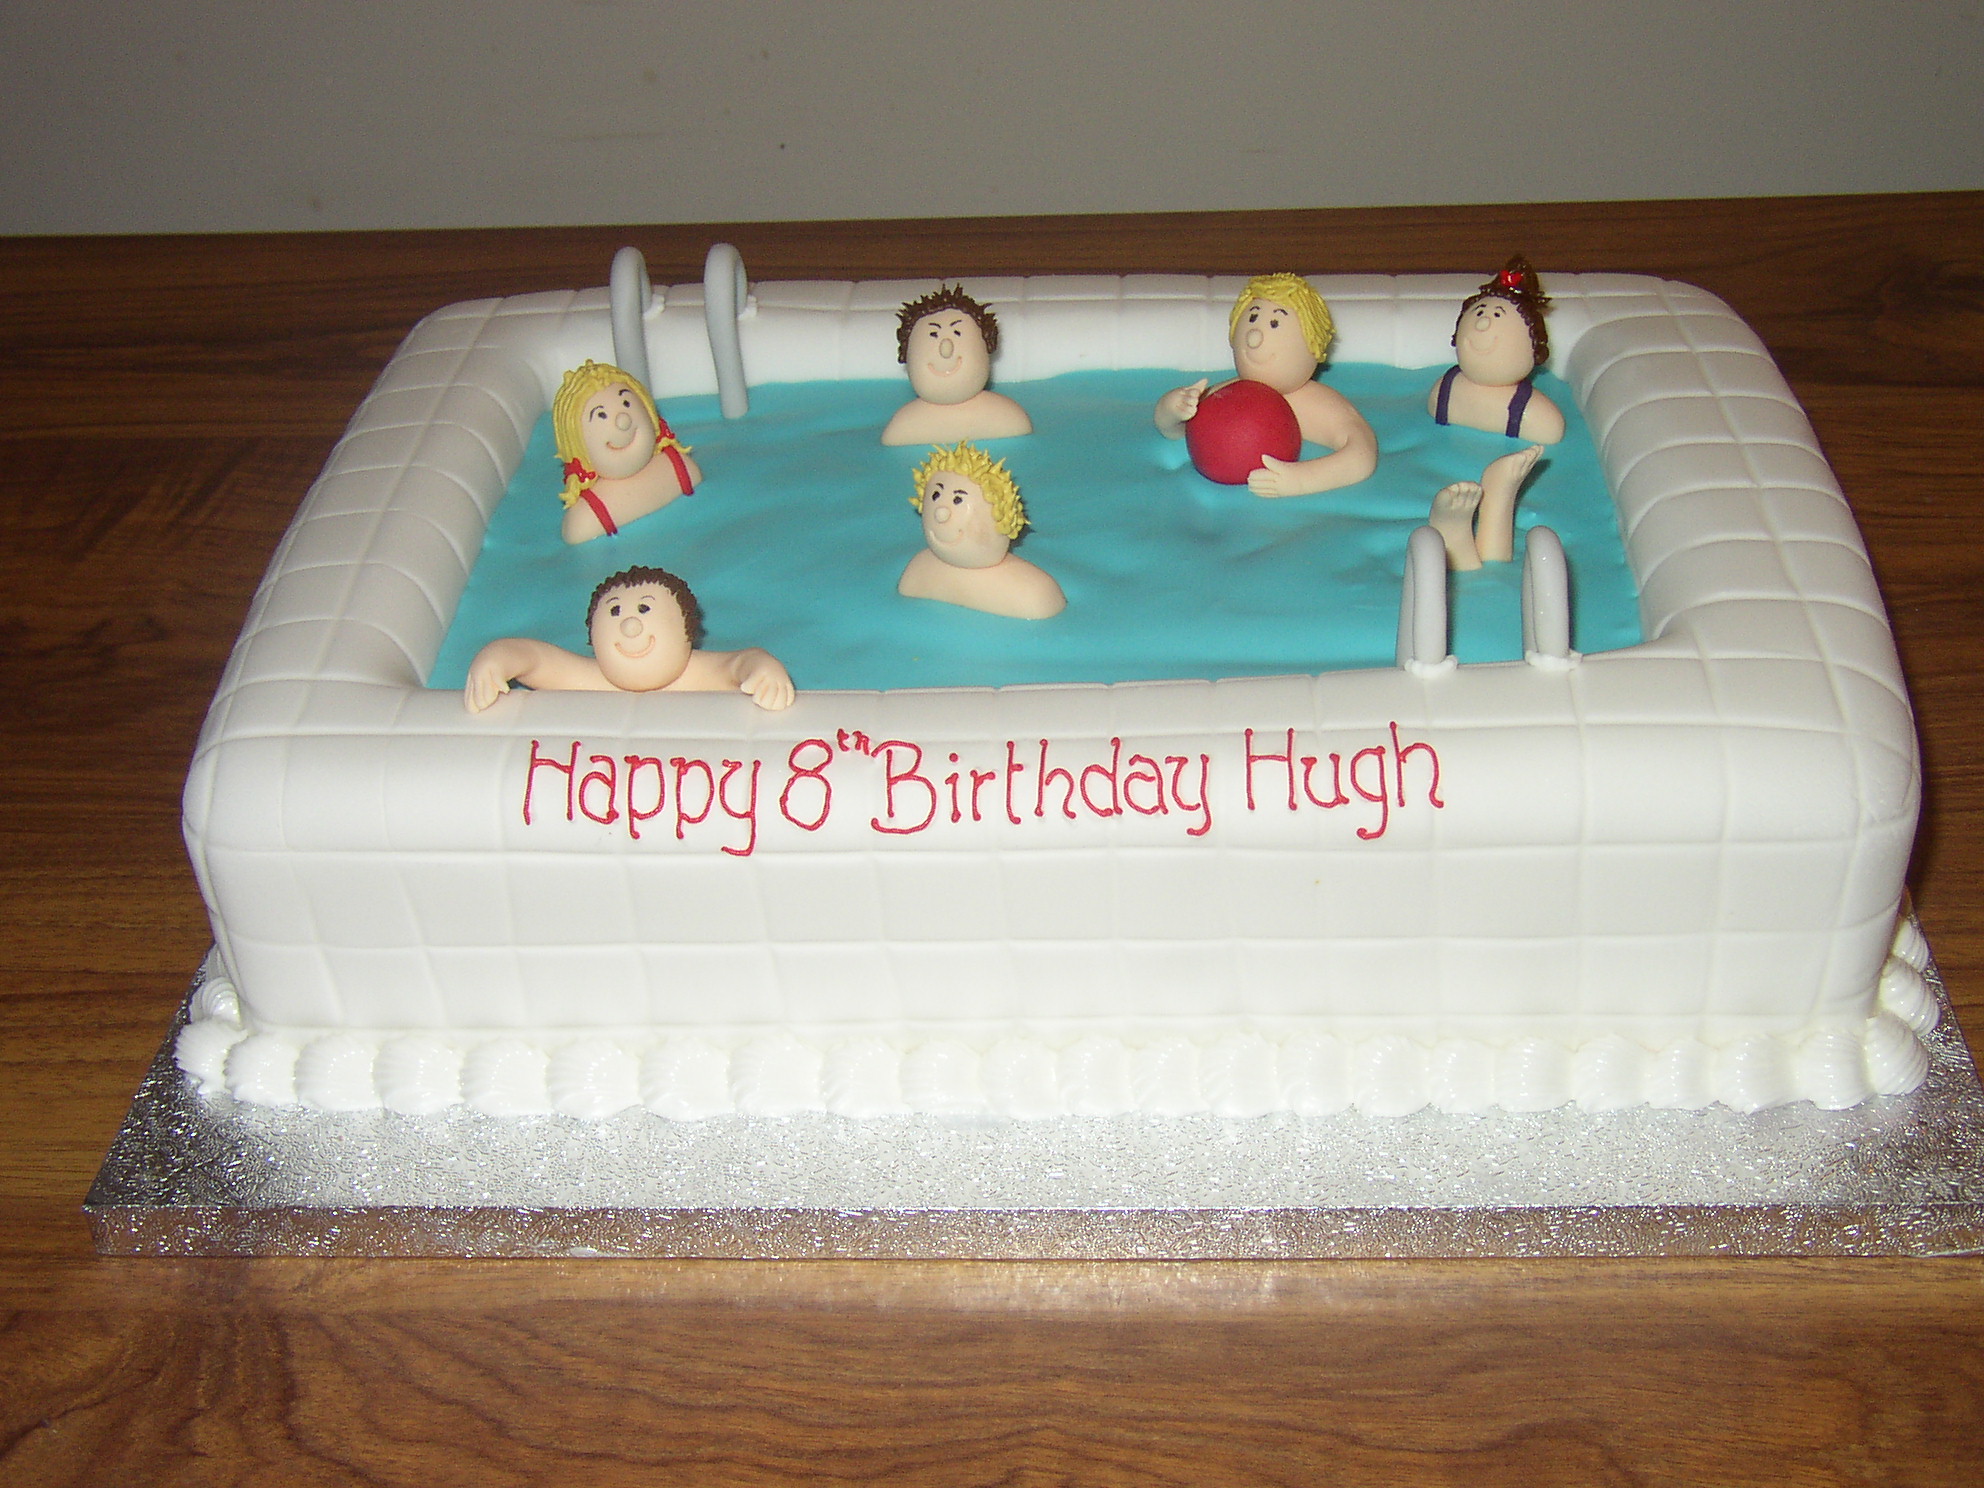 pass the peas please pool party cake